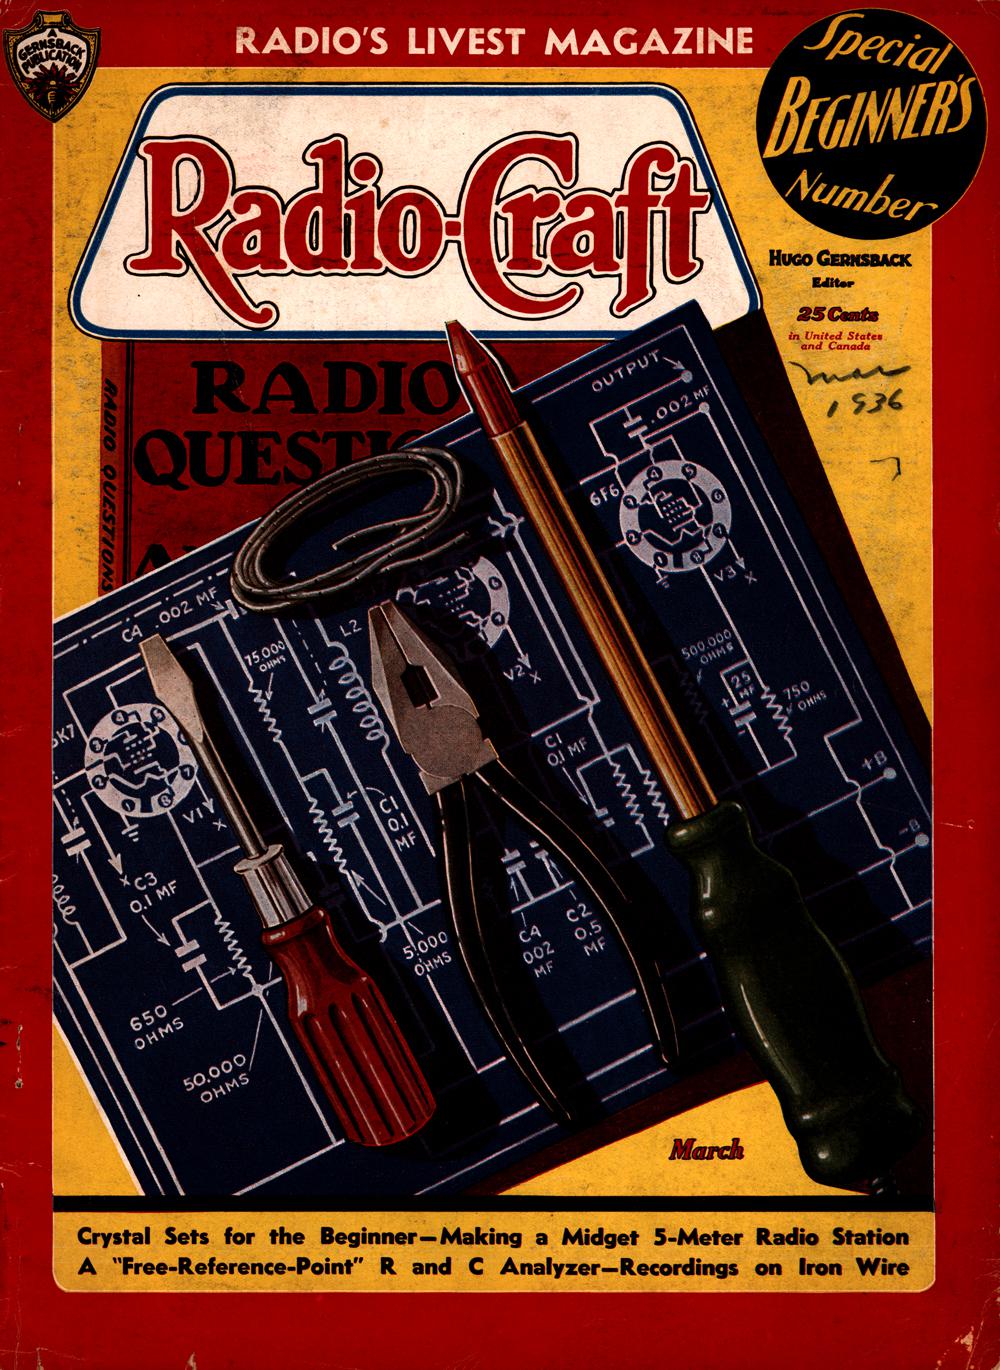 1936 - Radio-craft. and popular electronics; radio-electronics in all its phases - Vol. 7, No. 9